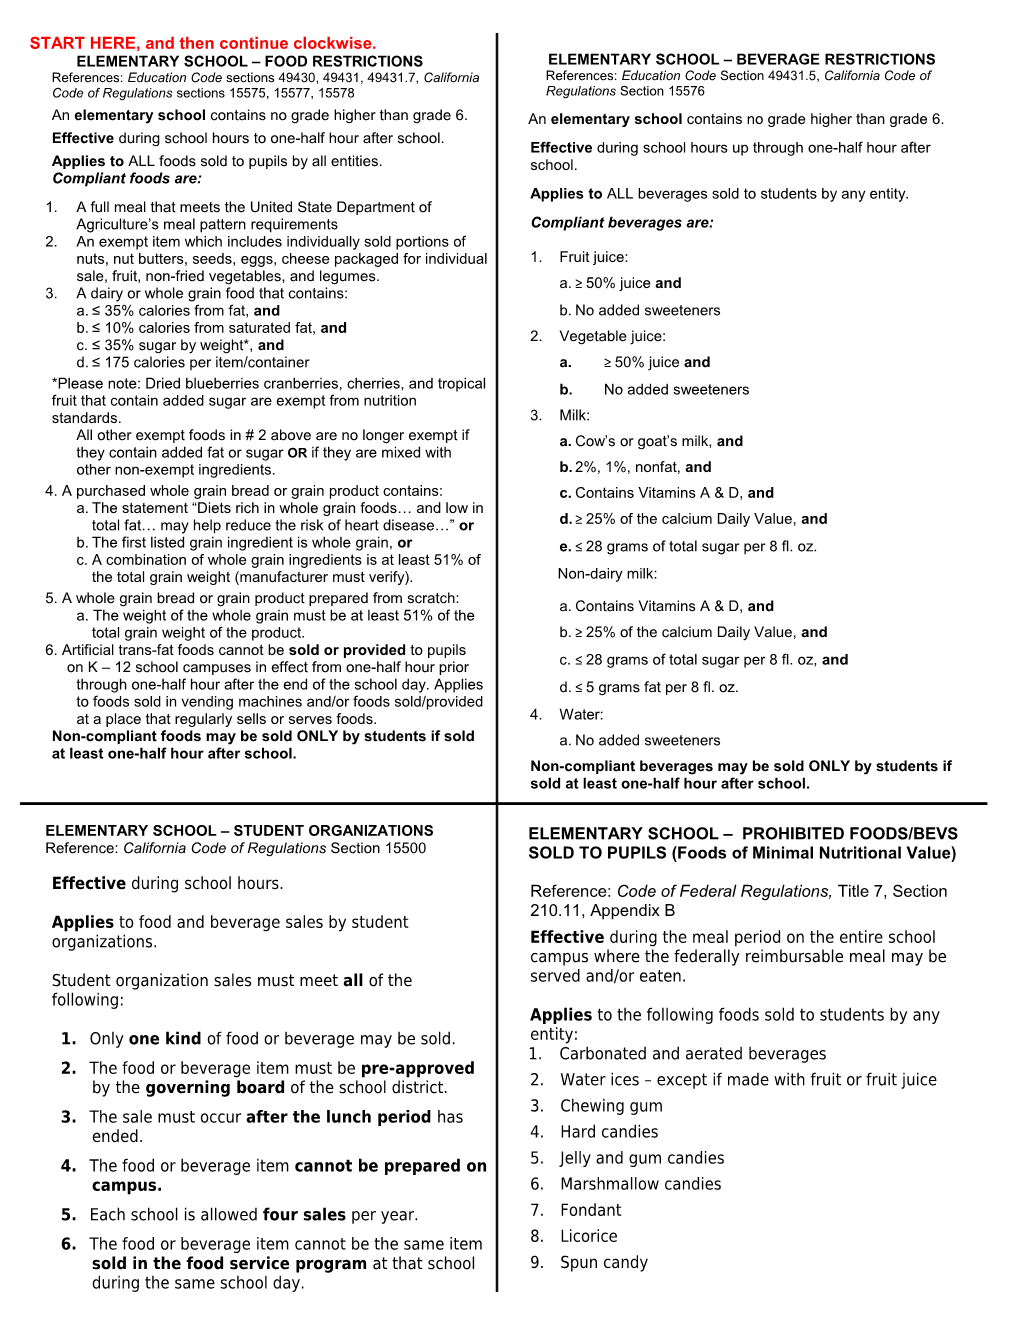 Competitive Food Quick Reference Cards - Healthy Eating and Nutrition Education (CA Dept